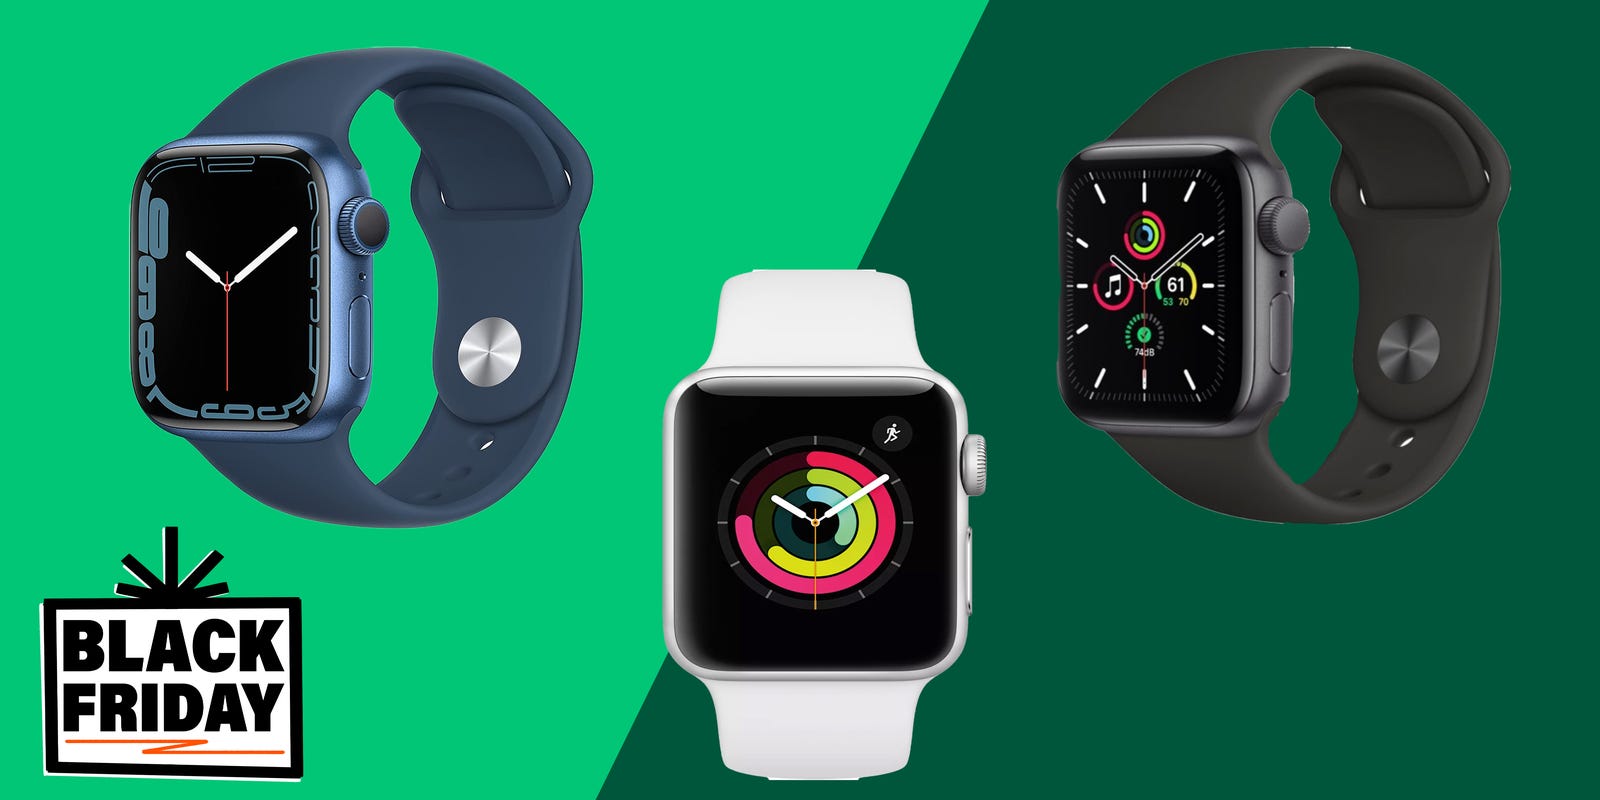 Black Friday 2021: Apple Watch Black Friday deals from Target, Amazon